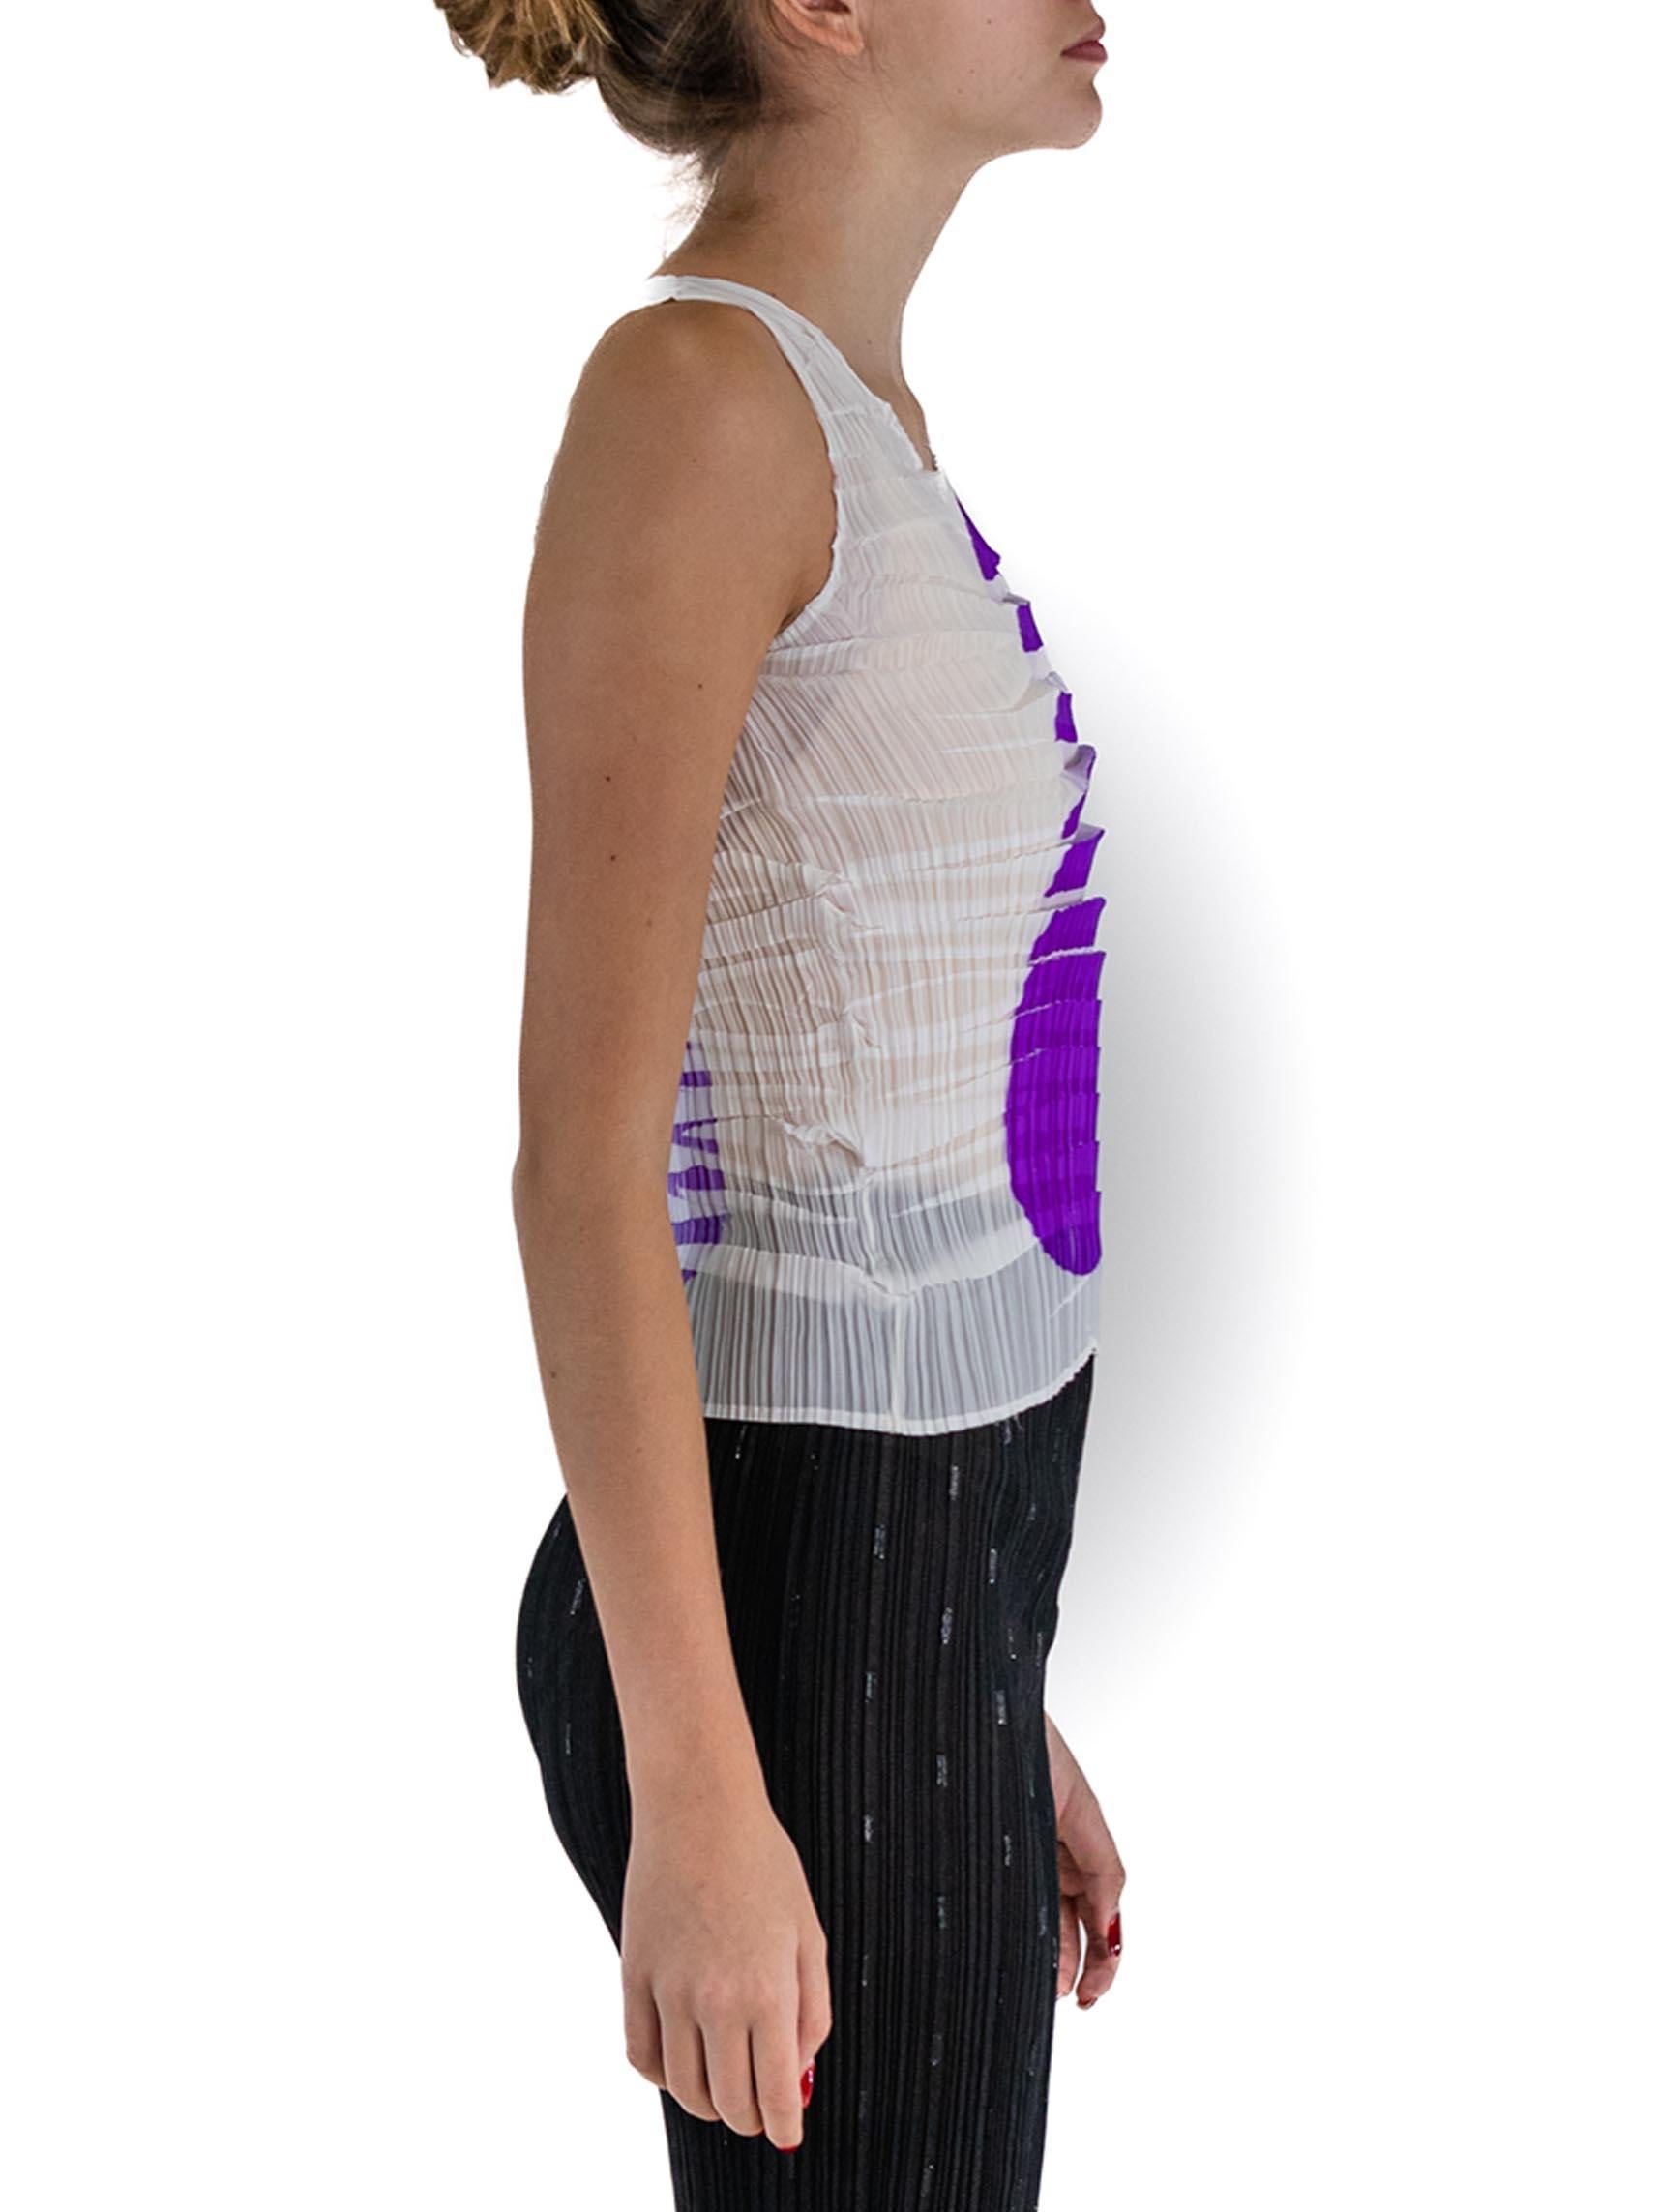 Women's 1990S ISSEY MIYAKE White Pleated Polyester Top With Printed Purple Shape For Sale